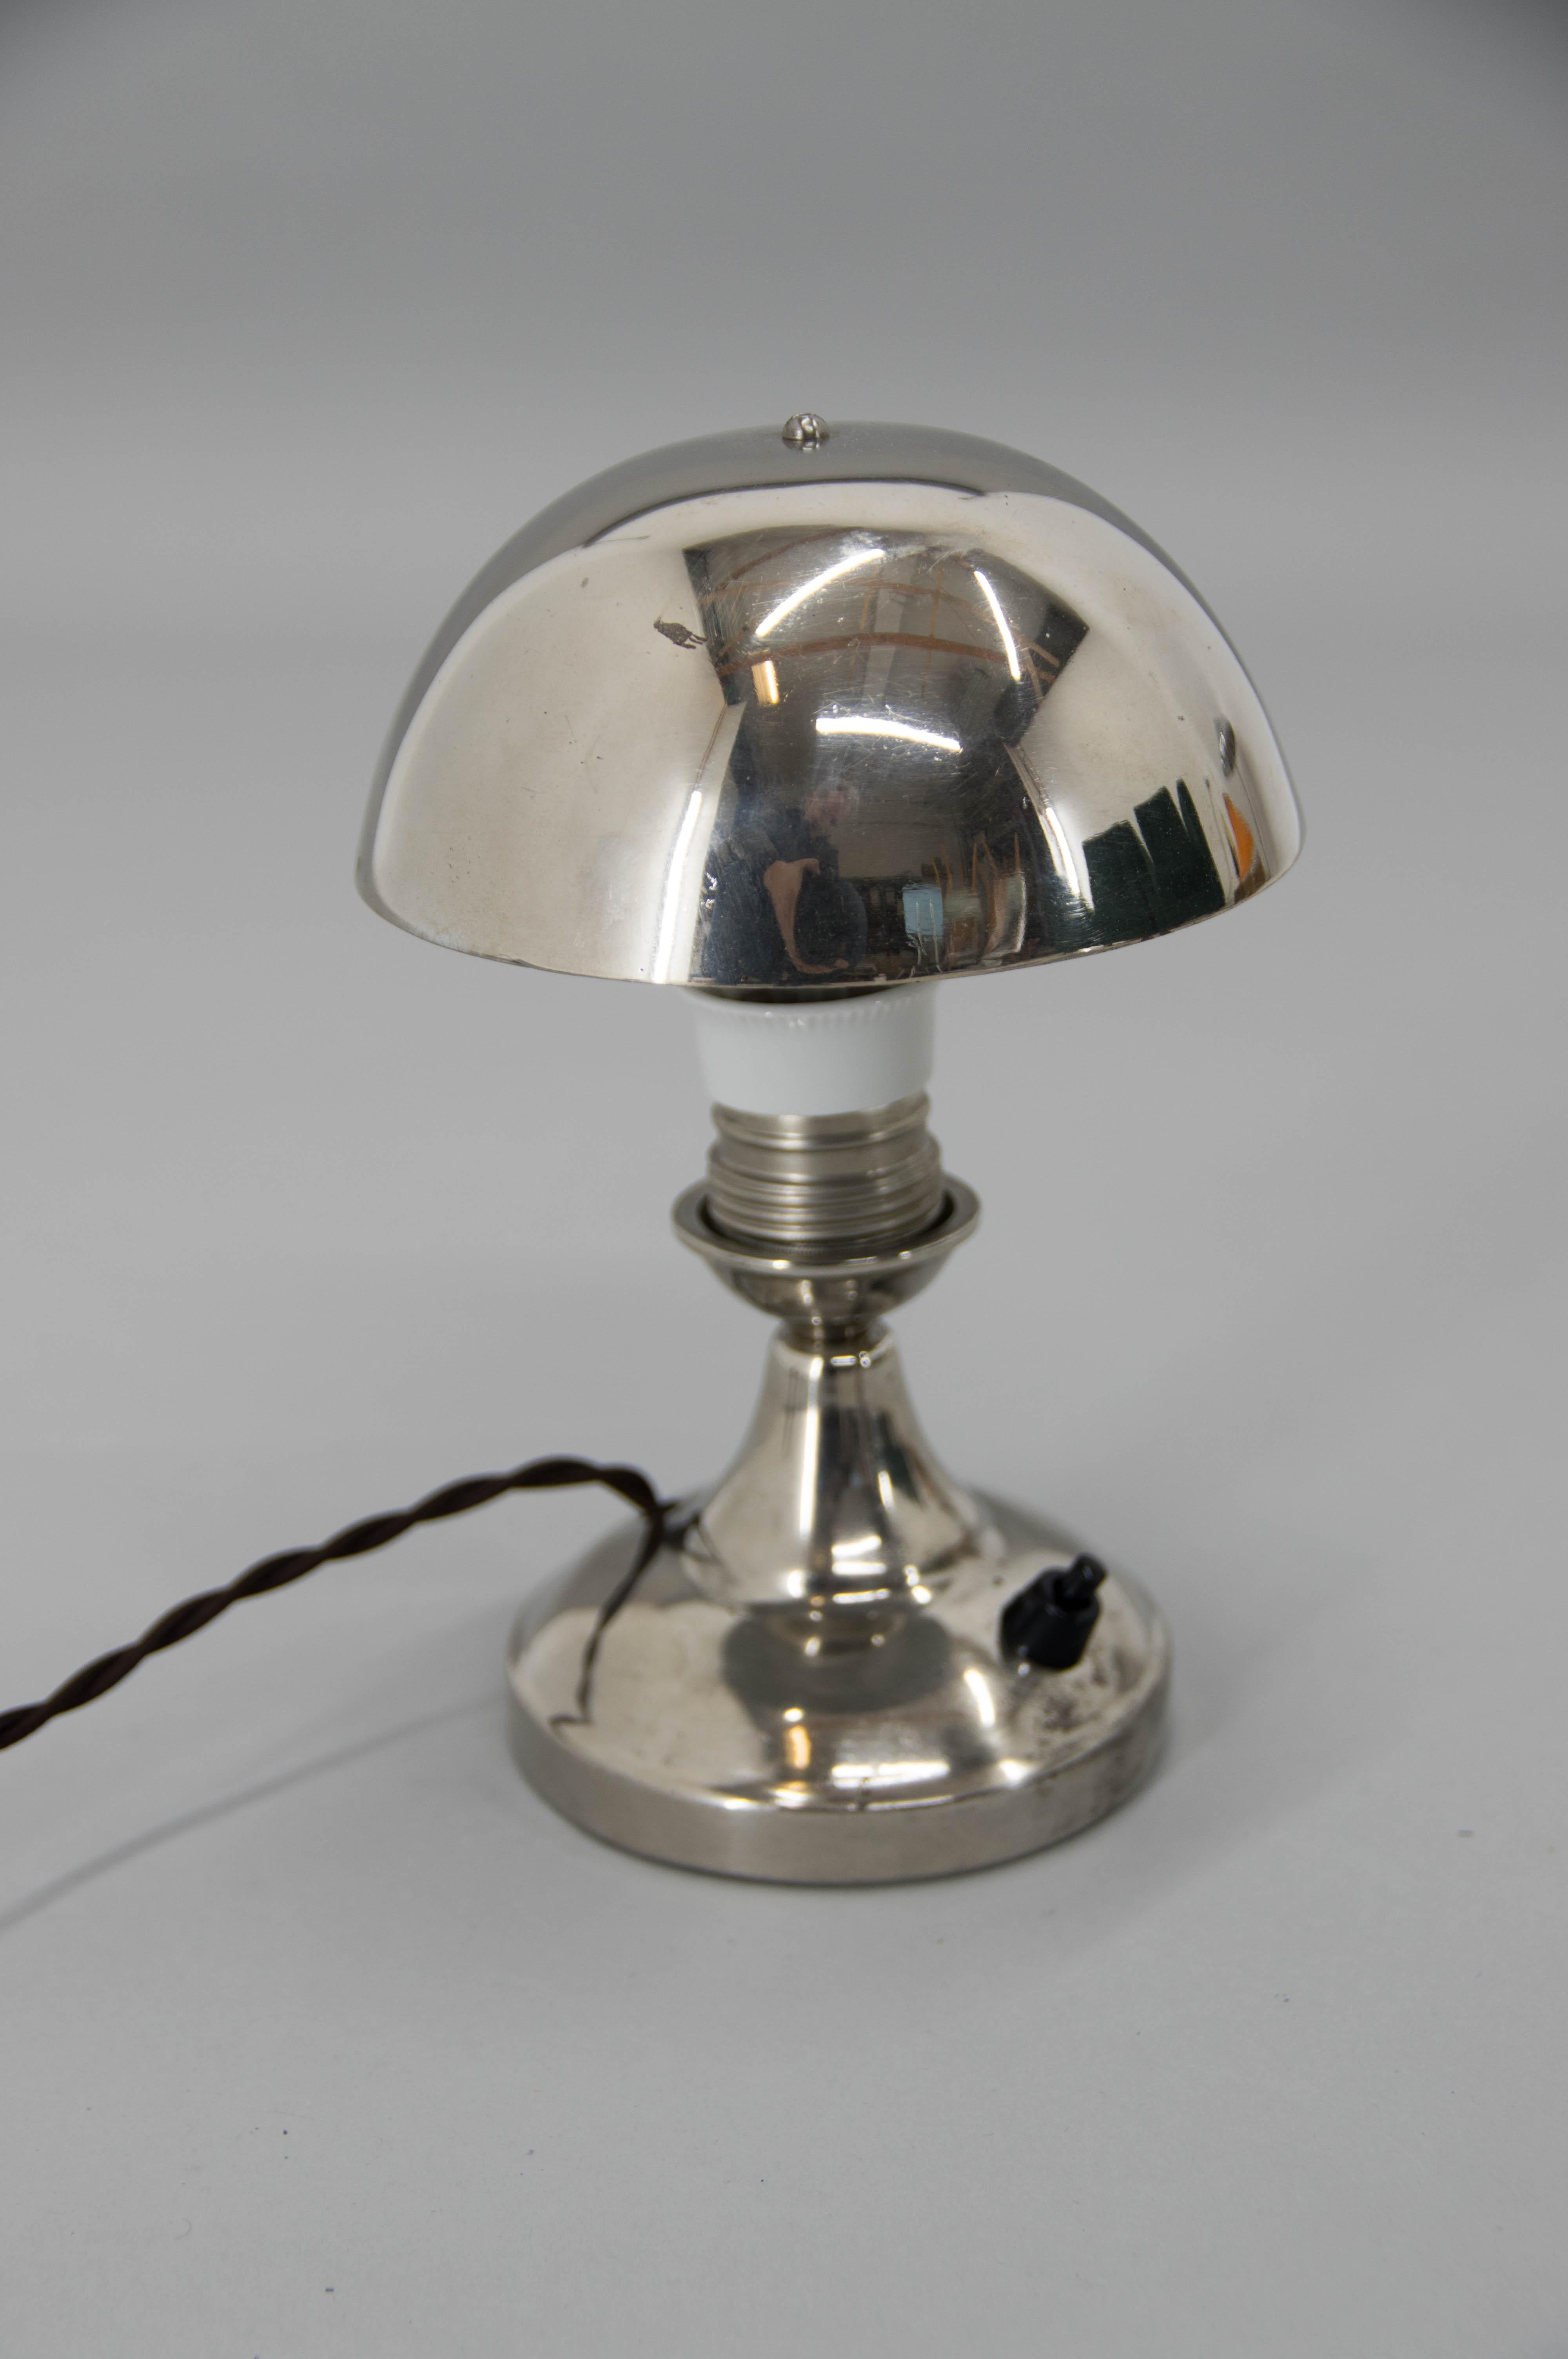 Tiny nickel-plated table or bedside lamp.
Polished, rewired: 40W, E25-E27 bulb
US plug adapter included.